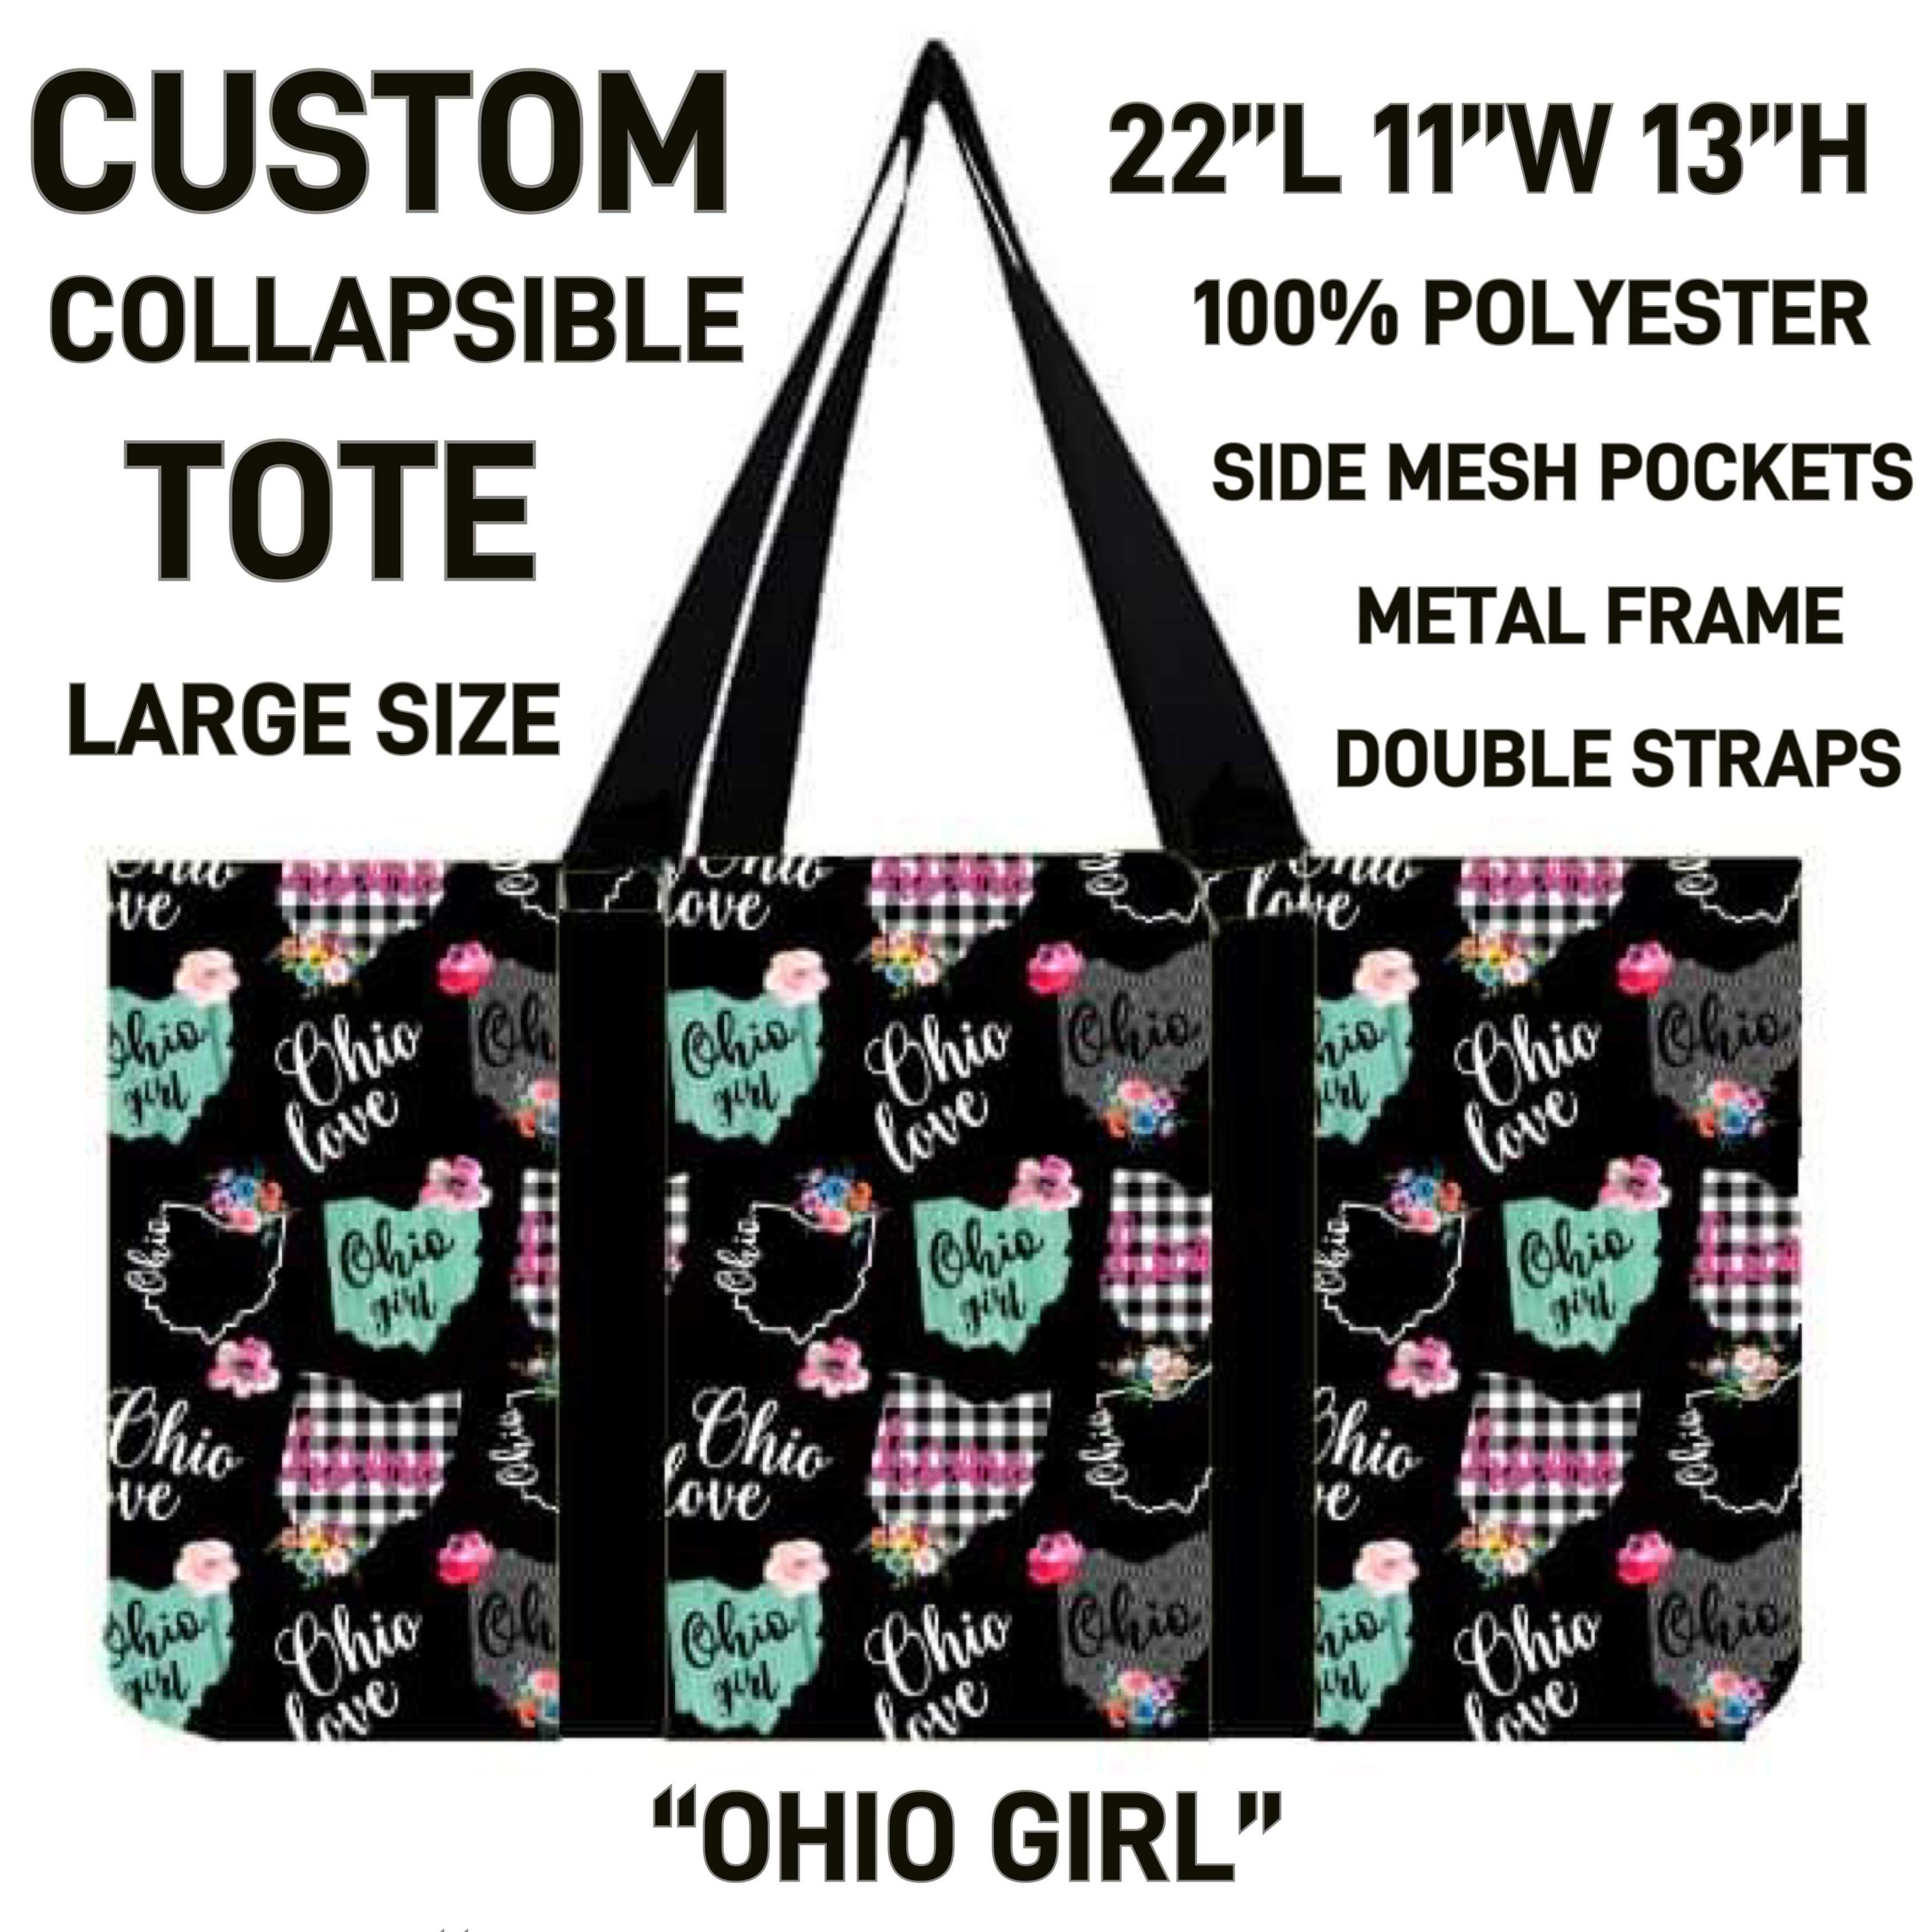 RTS - Ohio Girl Collapsible Tote